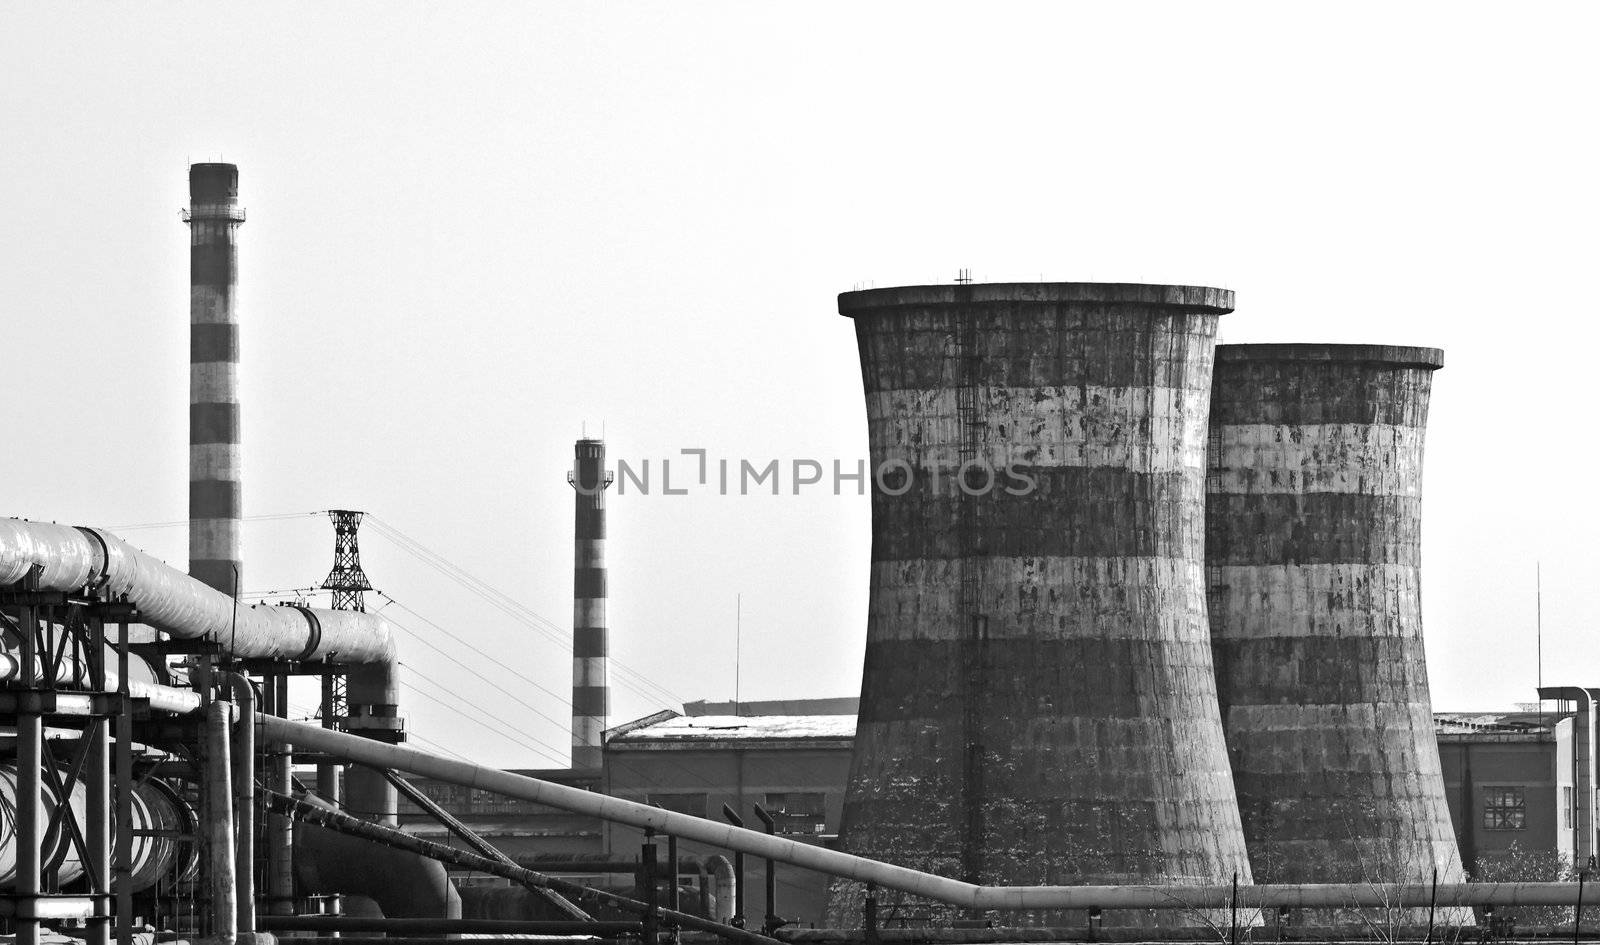 Black & White landscape photo of factory with giant chimneys